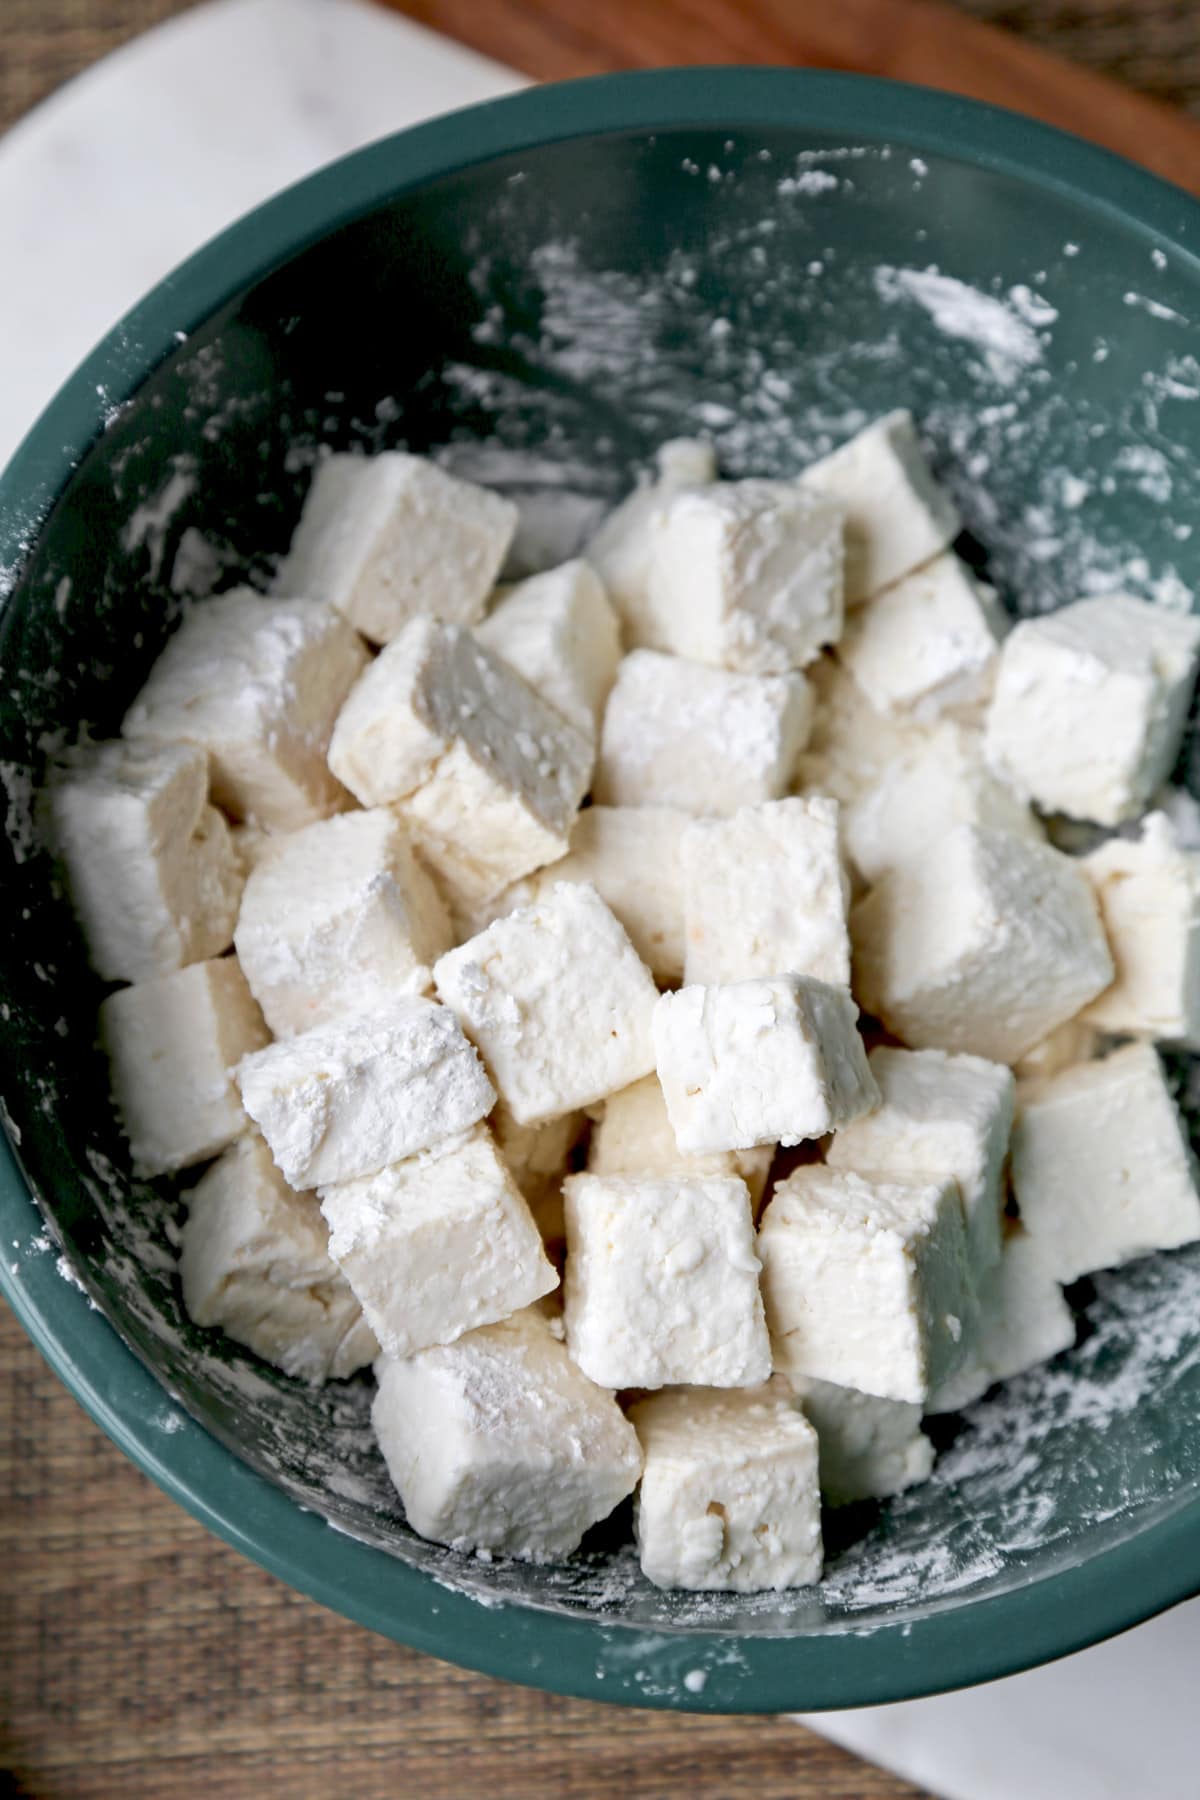 Tofu cubes dusted with cornstarch